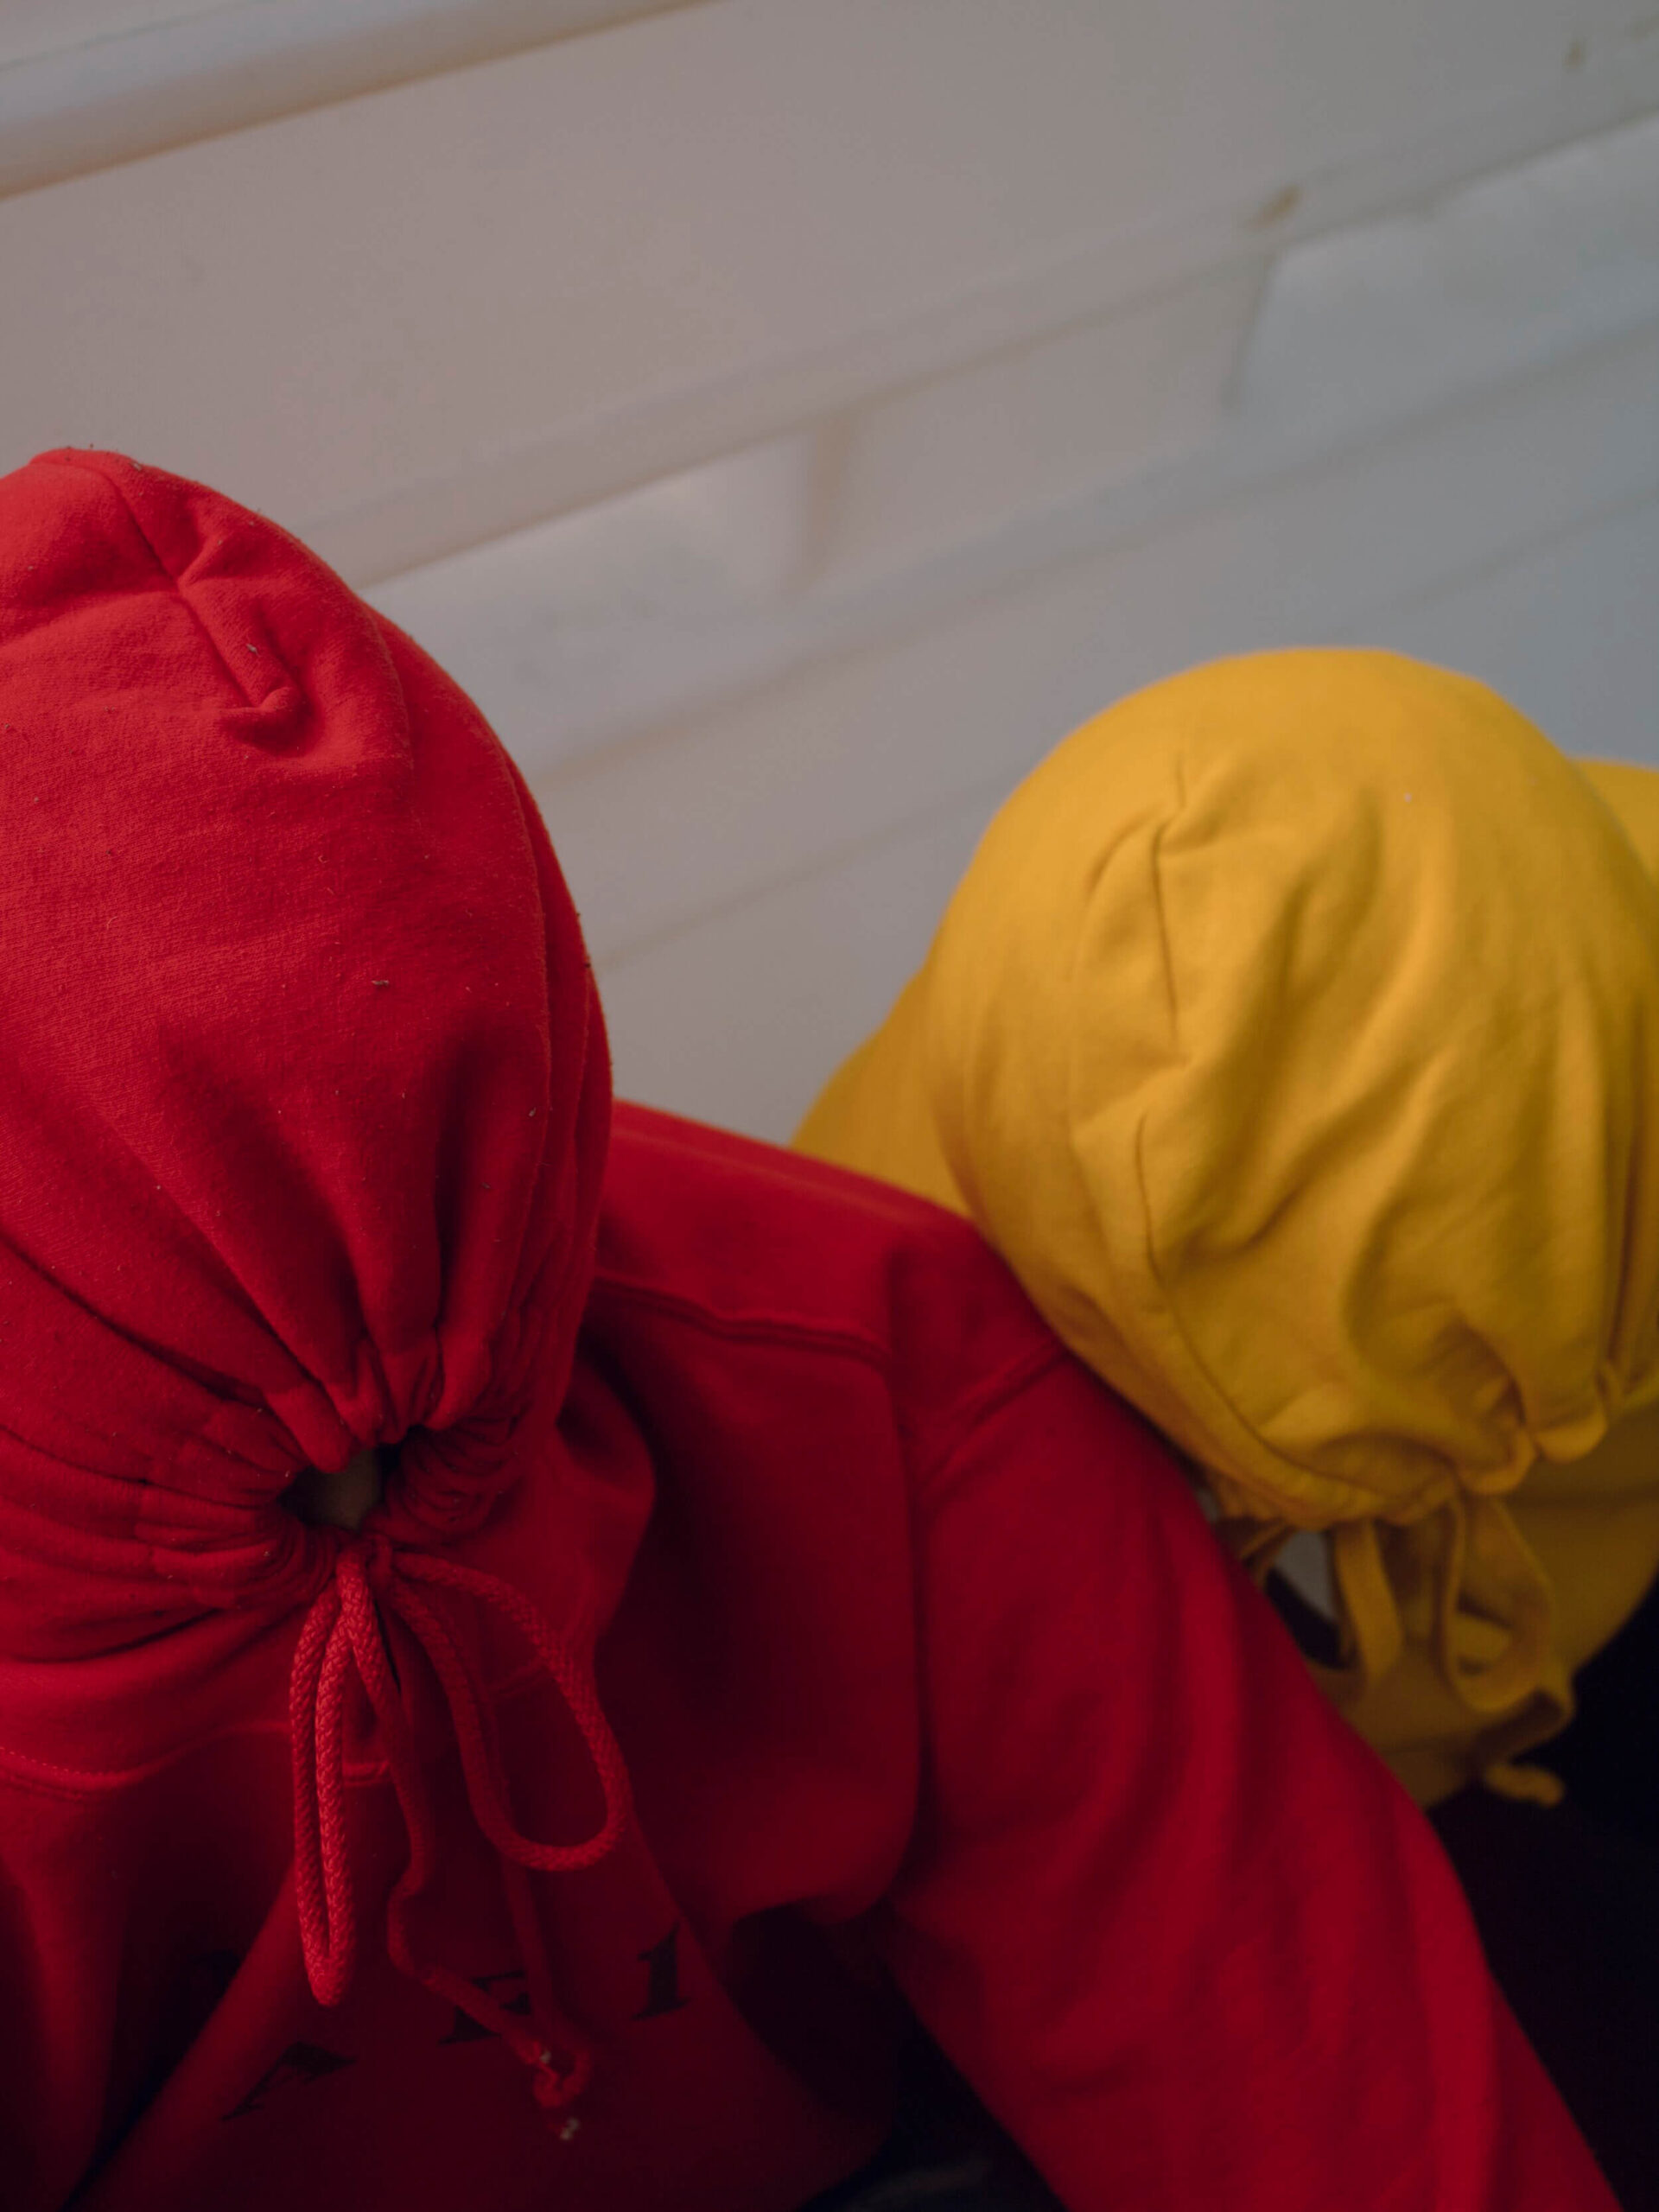 A an image of two people wearing red and yellow hoodies. The hood of their jackets is tightened as to cover their faces.